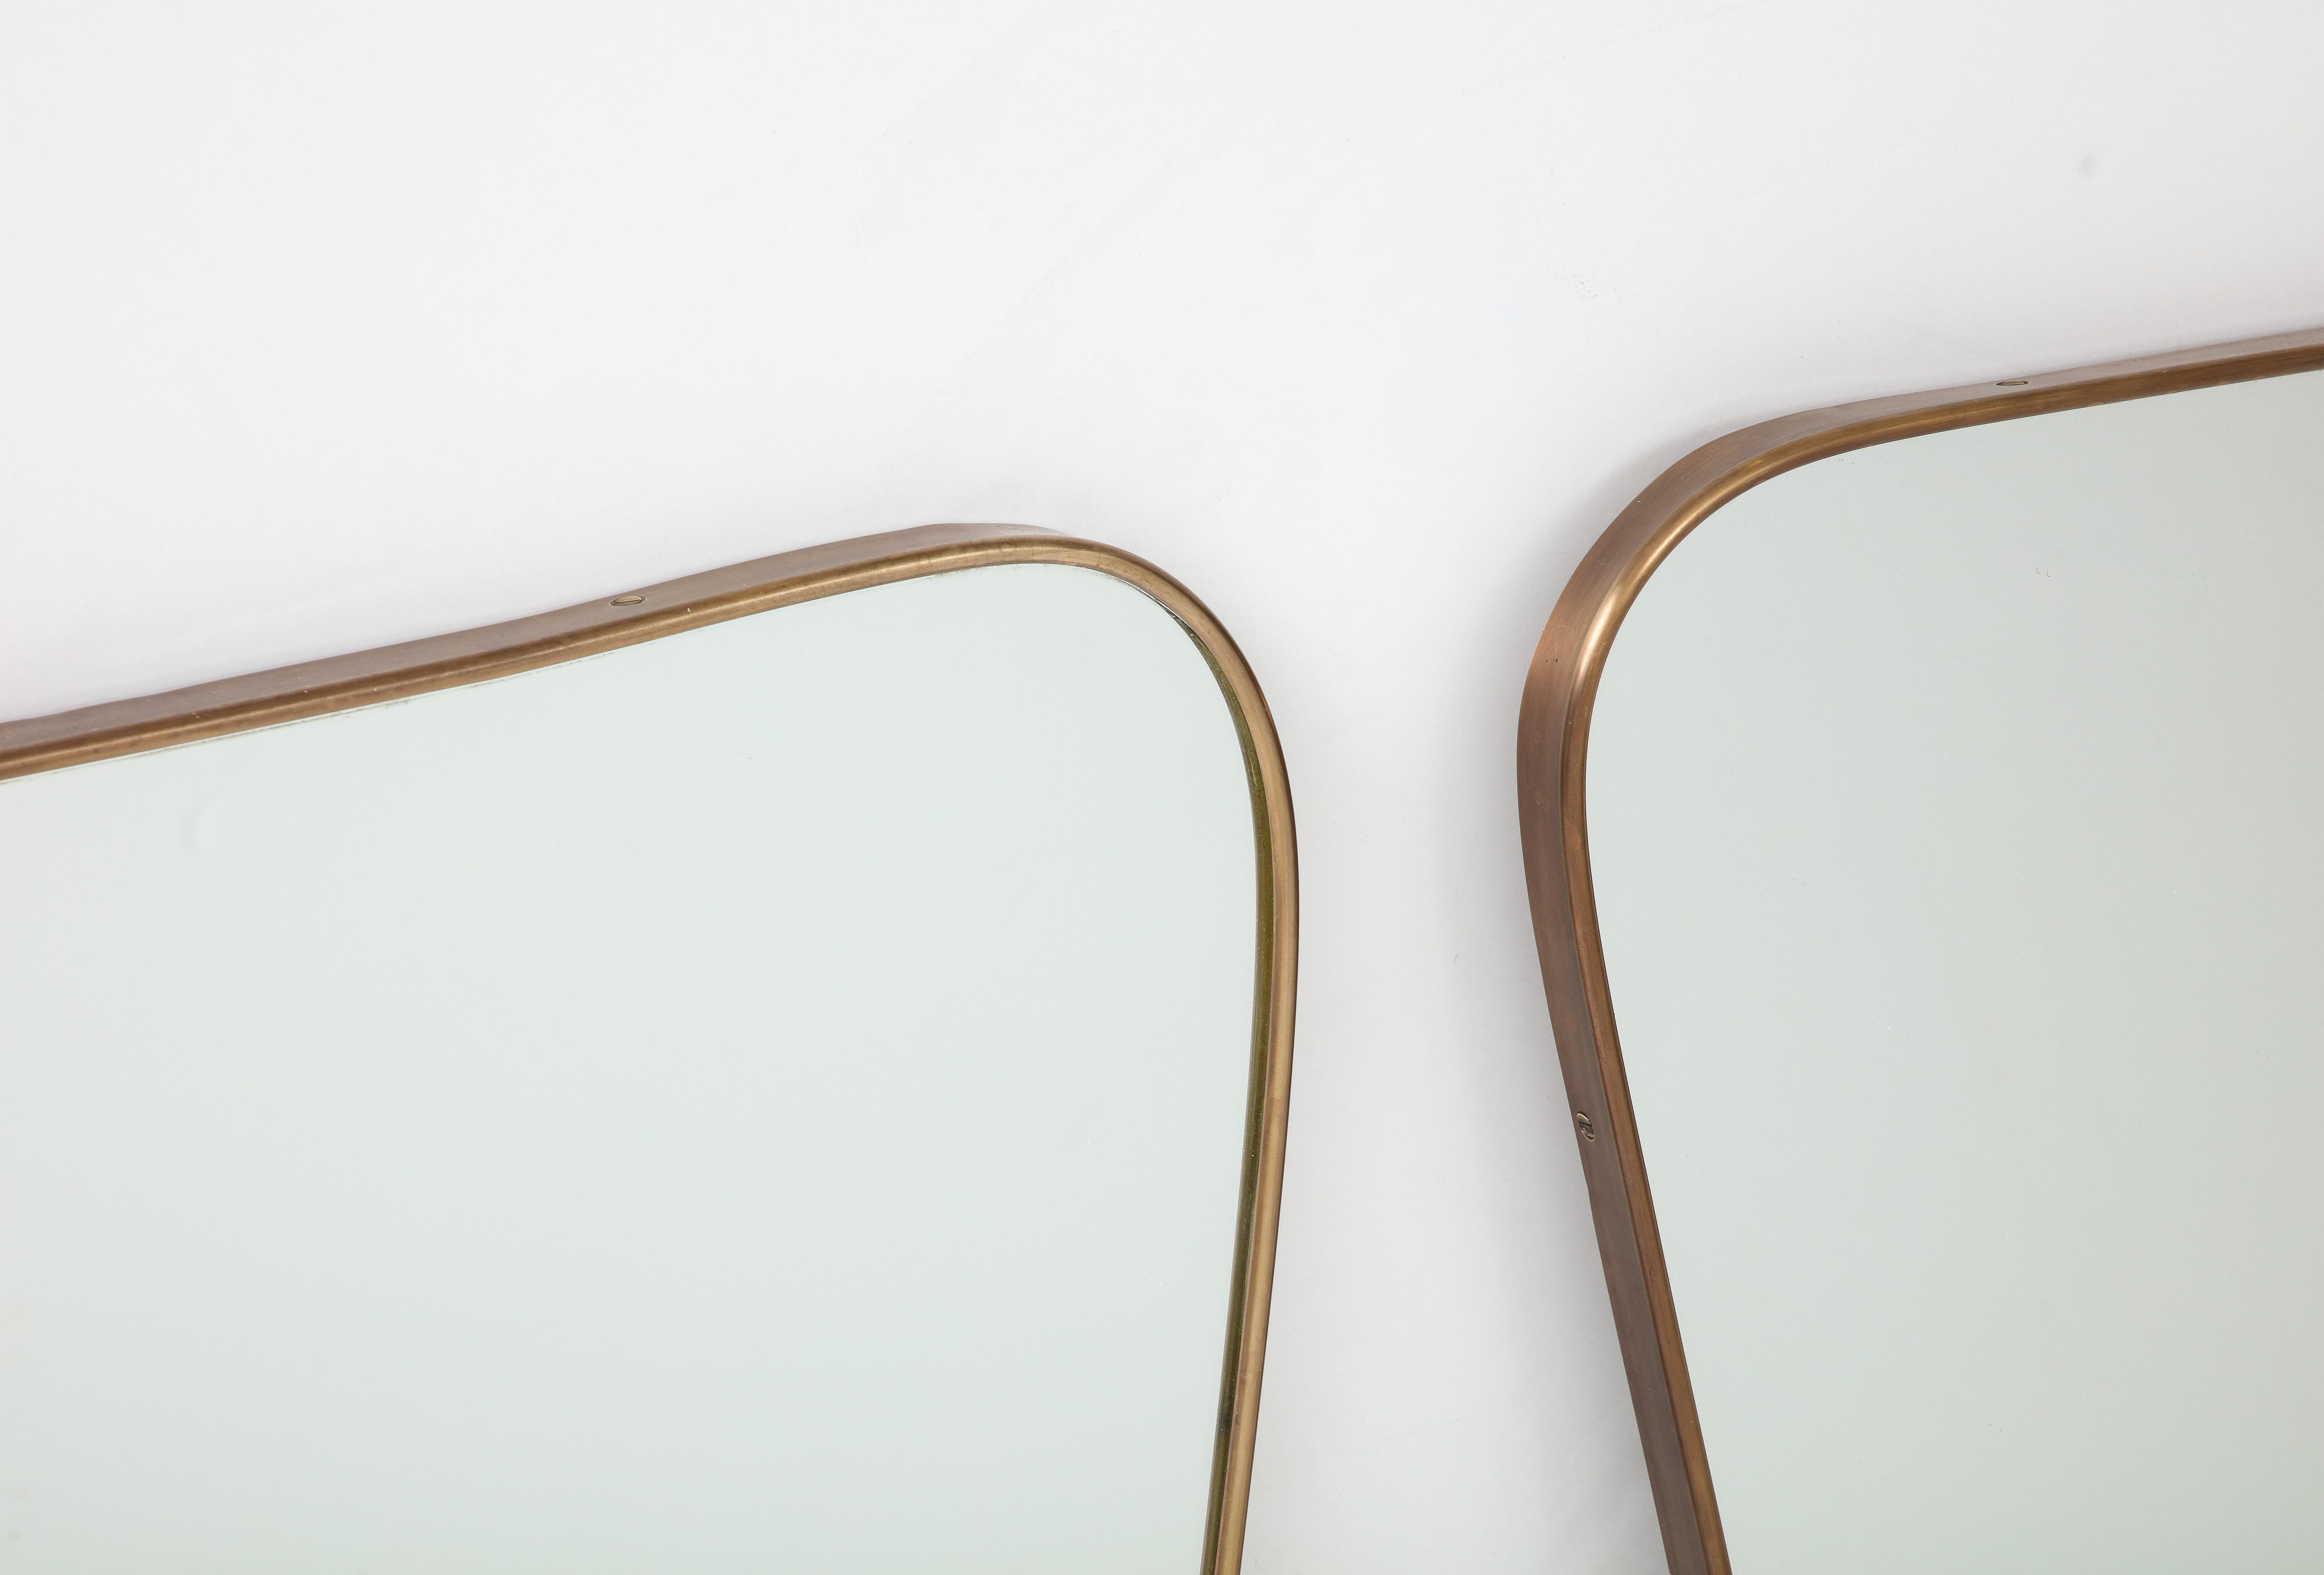 Midcentury Italian Modernist Pair of Large Shaped Brass Mirrors, 1950s For Sale 2